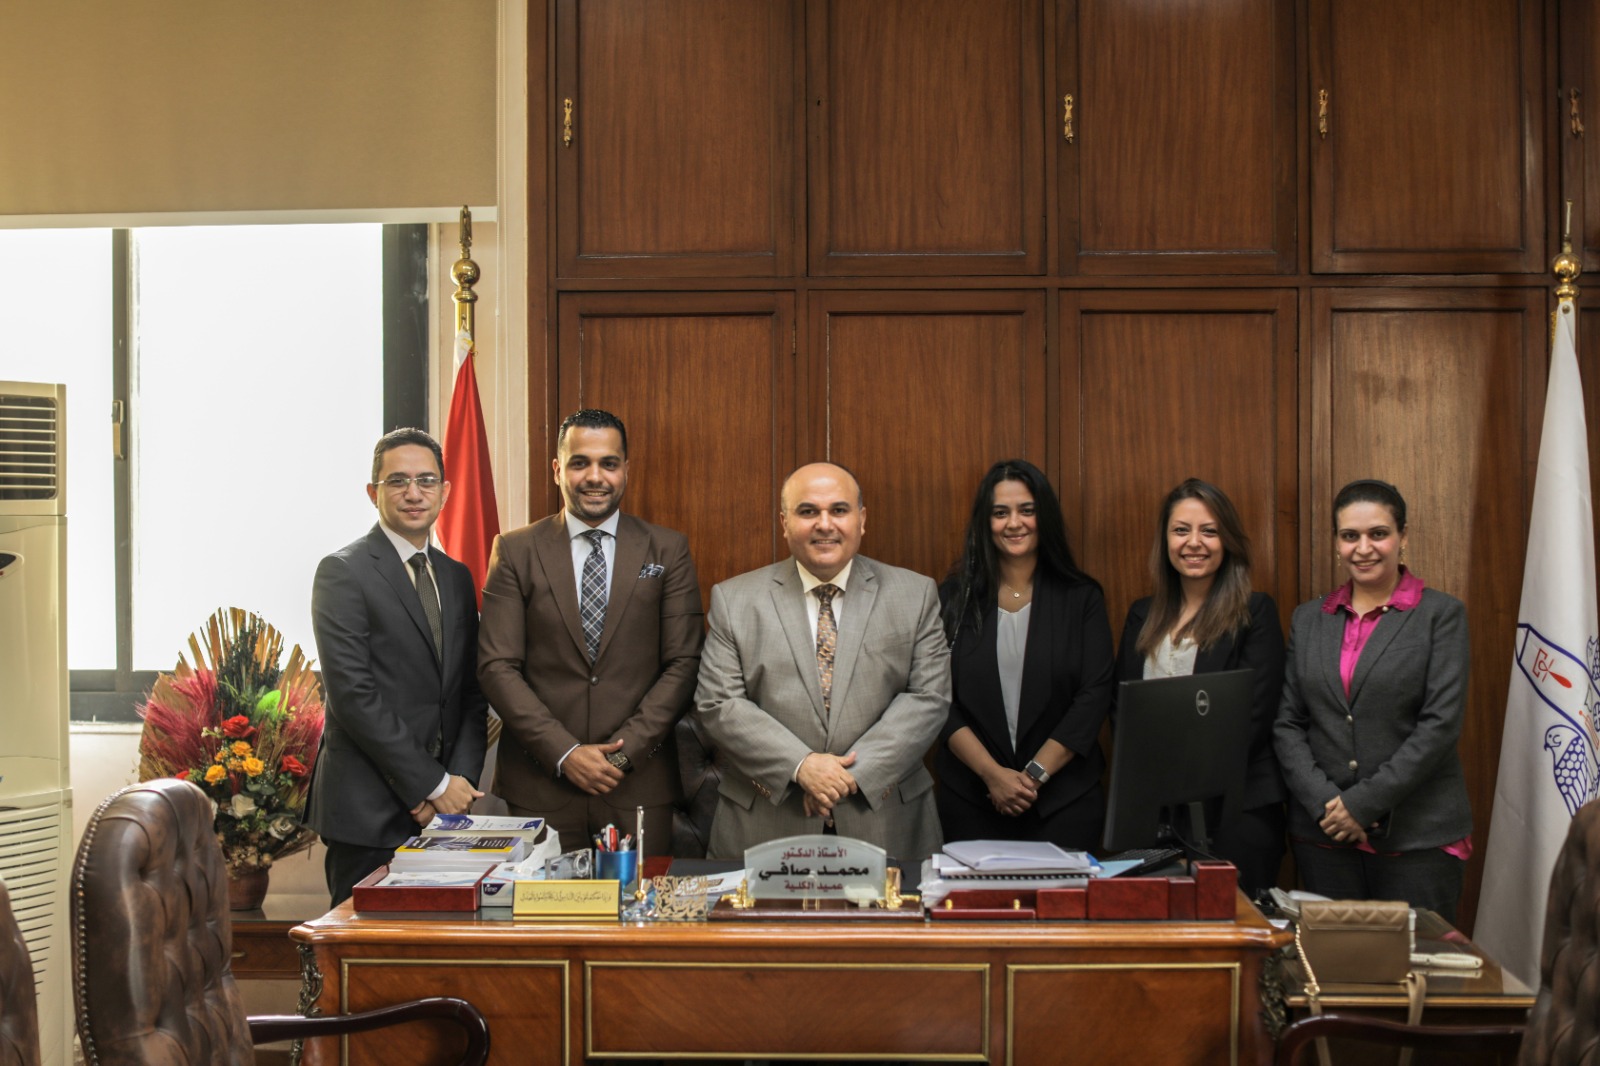  MPL In cooperation with Center for legal and economics studies Faculty of Law -Ain shams university Cairo - Egypt